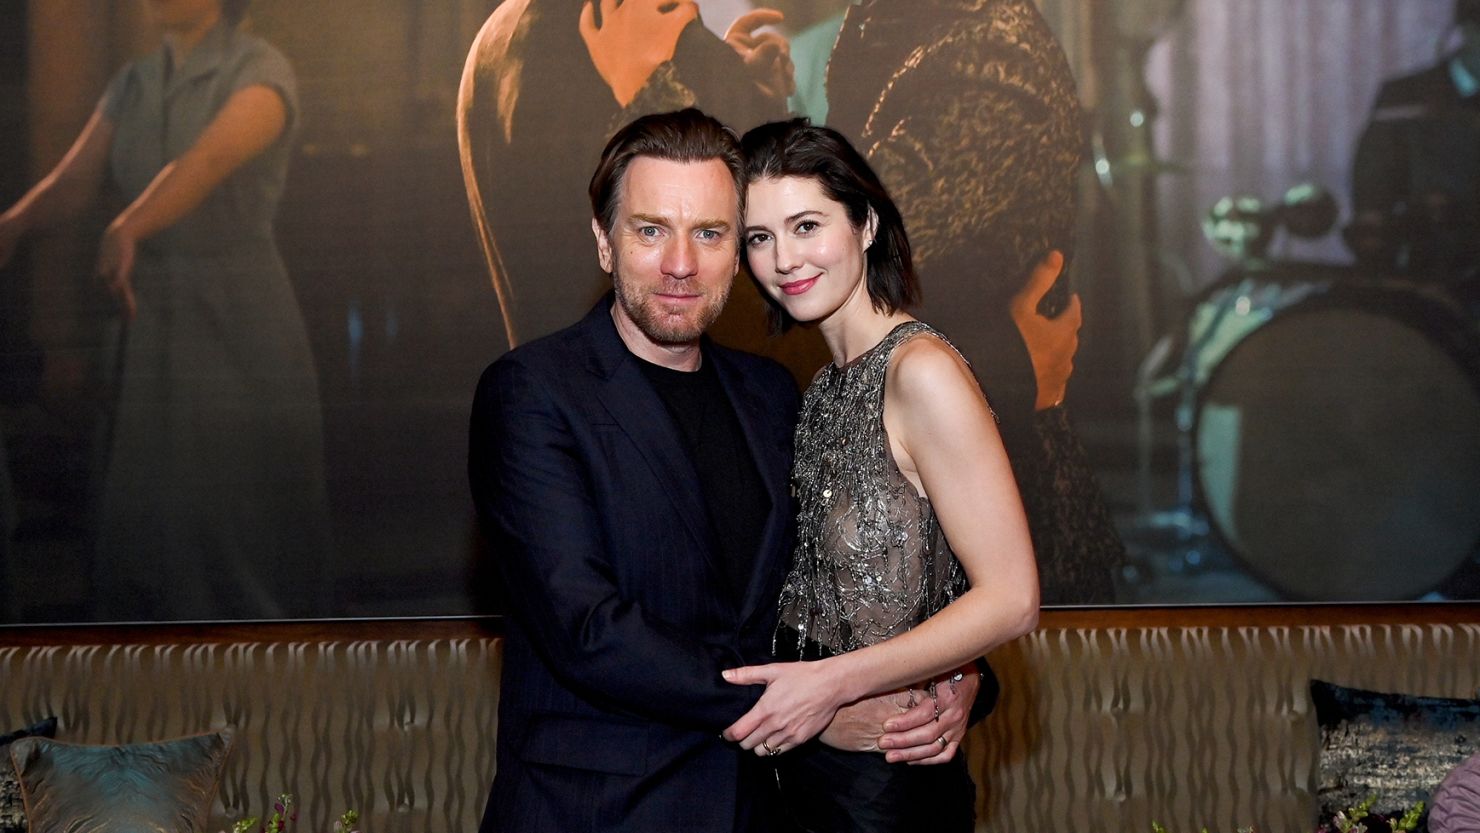 Ewan McGregor (left) and Mary Elizabeth Winstead (right) at the premiere event for "A Gentleman in Moscow" in New York City on March 12.